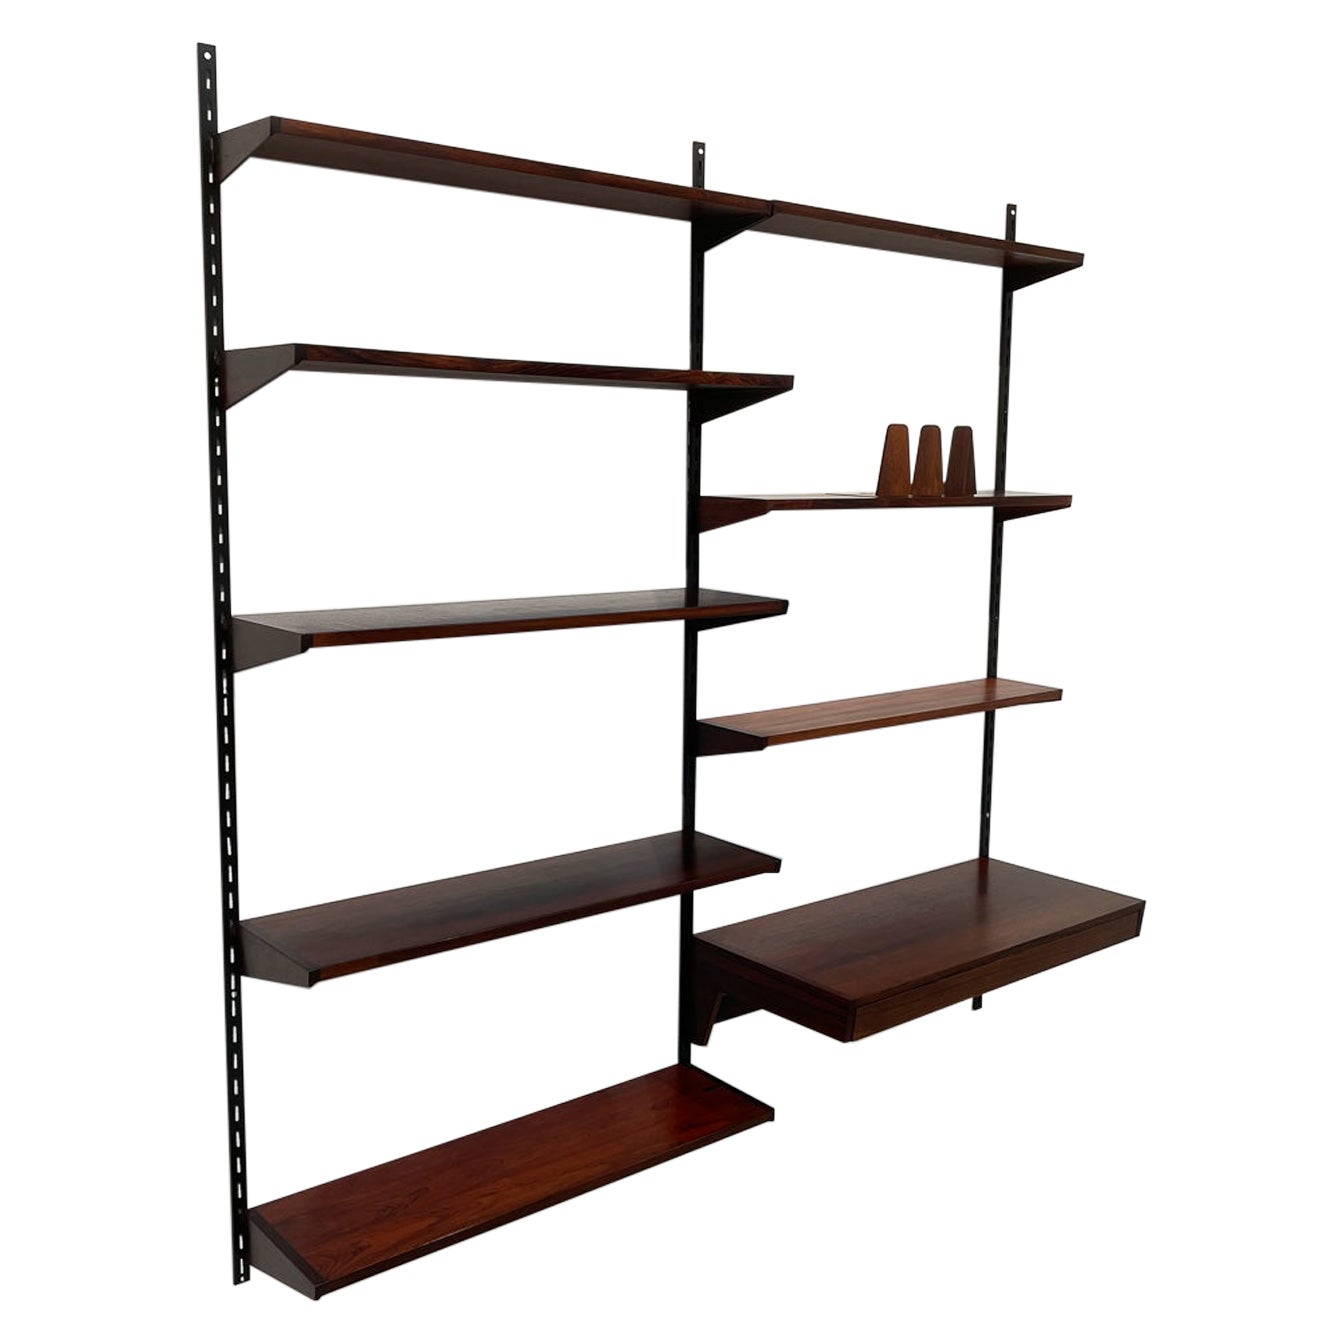 Vintage Danish Rosewood 2-Bay Wall Unit by Kai Kristiansen for FM, 1960s For Sale